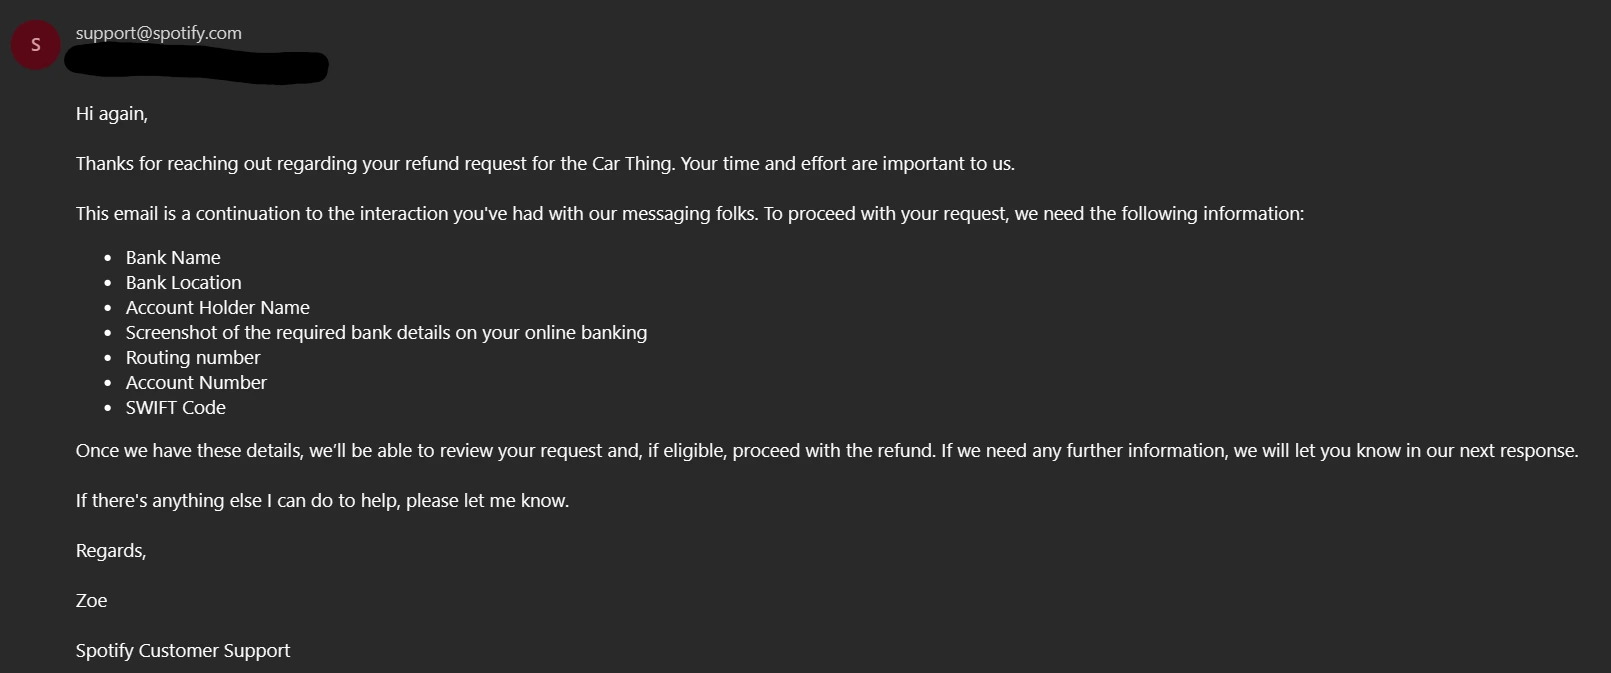 spotify-car-thing-refund-bank-details